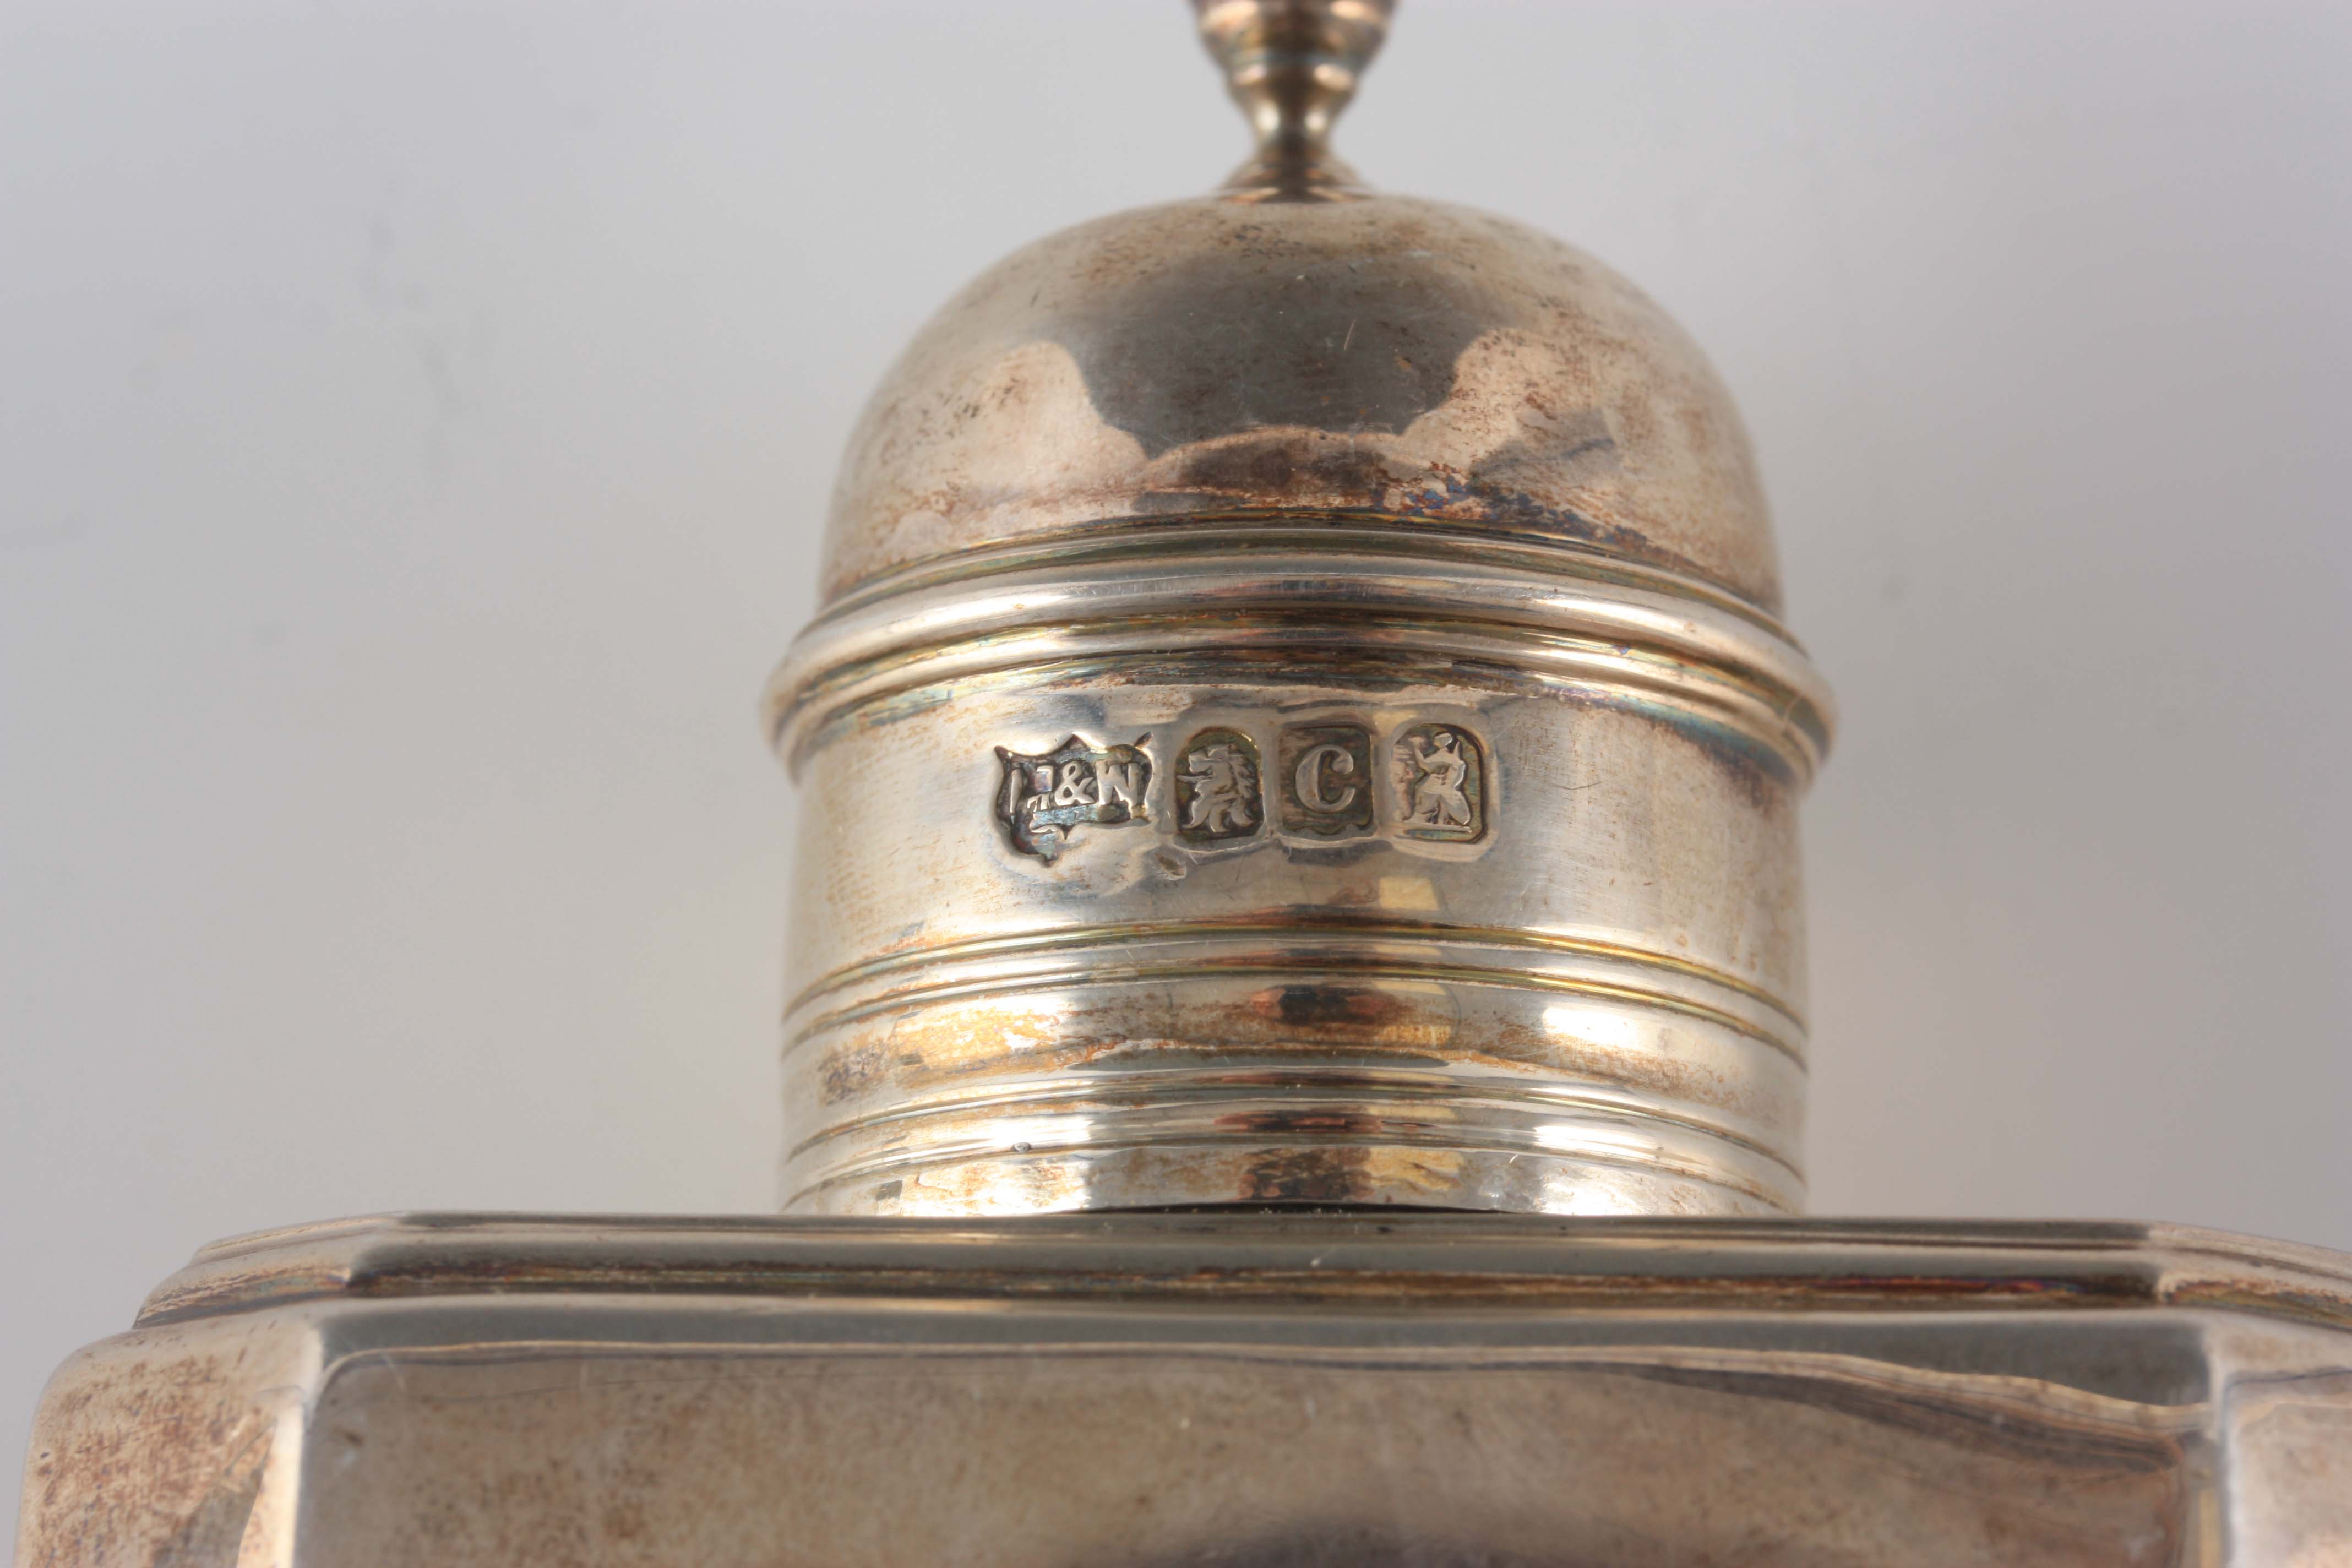 A LATE 19TH CENTURY SILVER TEA CADDY BY MAPPIN AND WEBB with domed finial and clipped corners by - Image 5 of 7